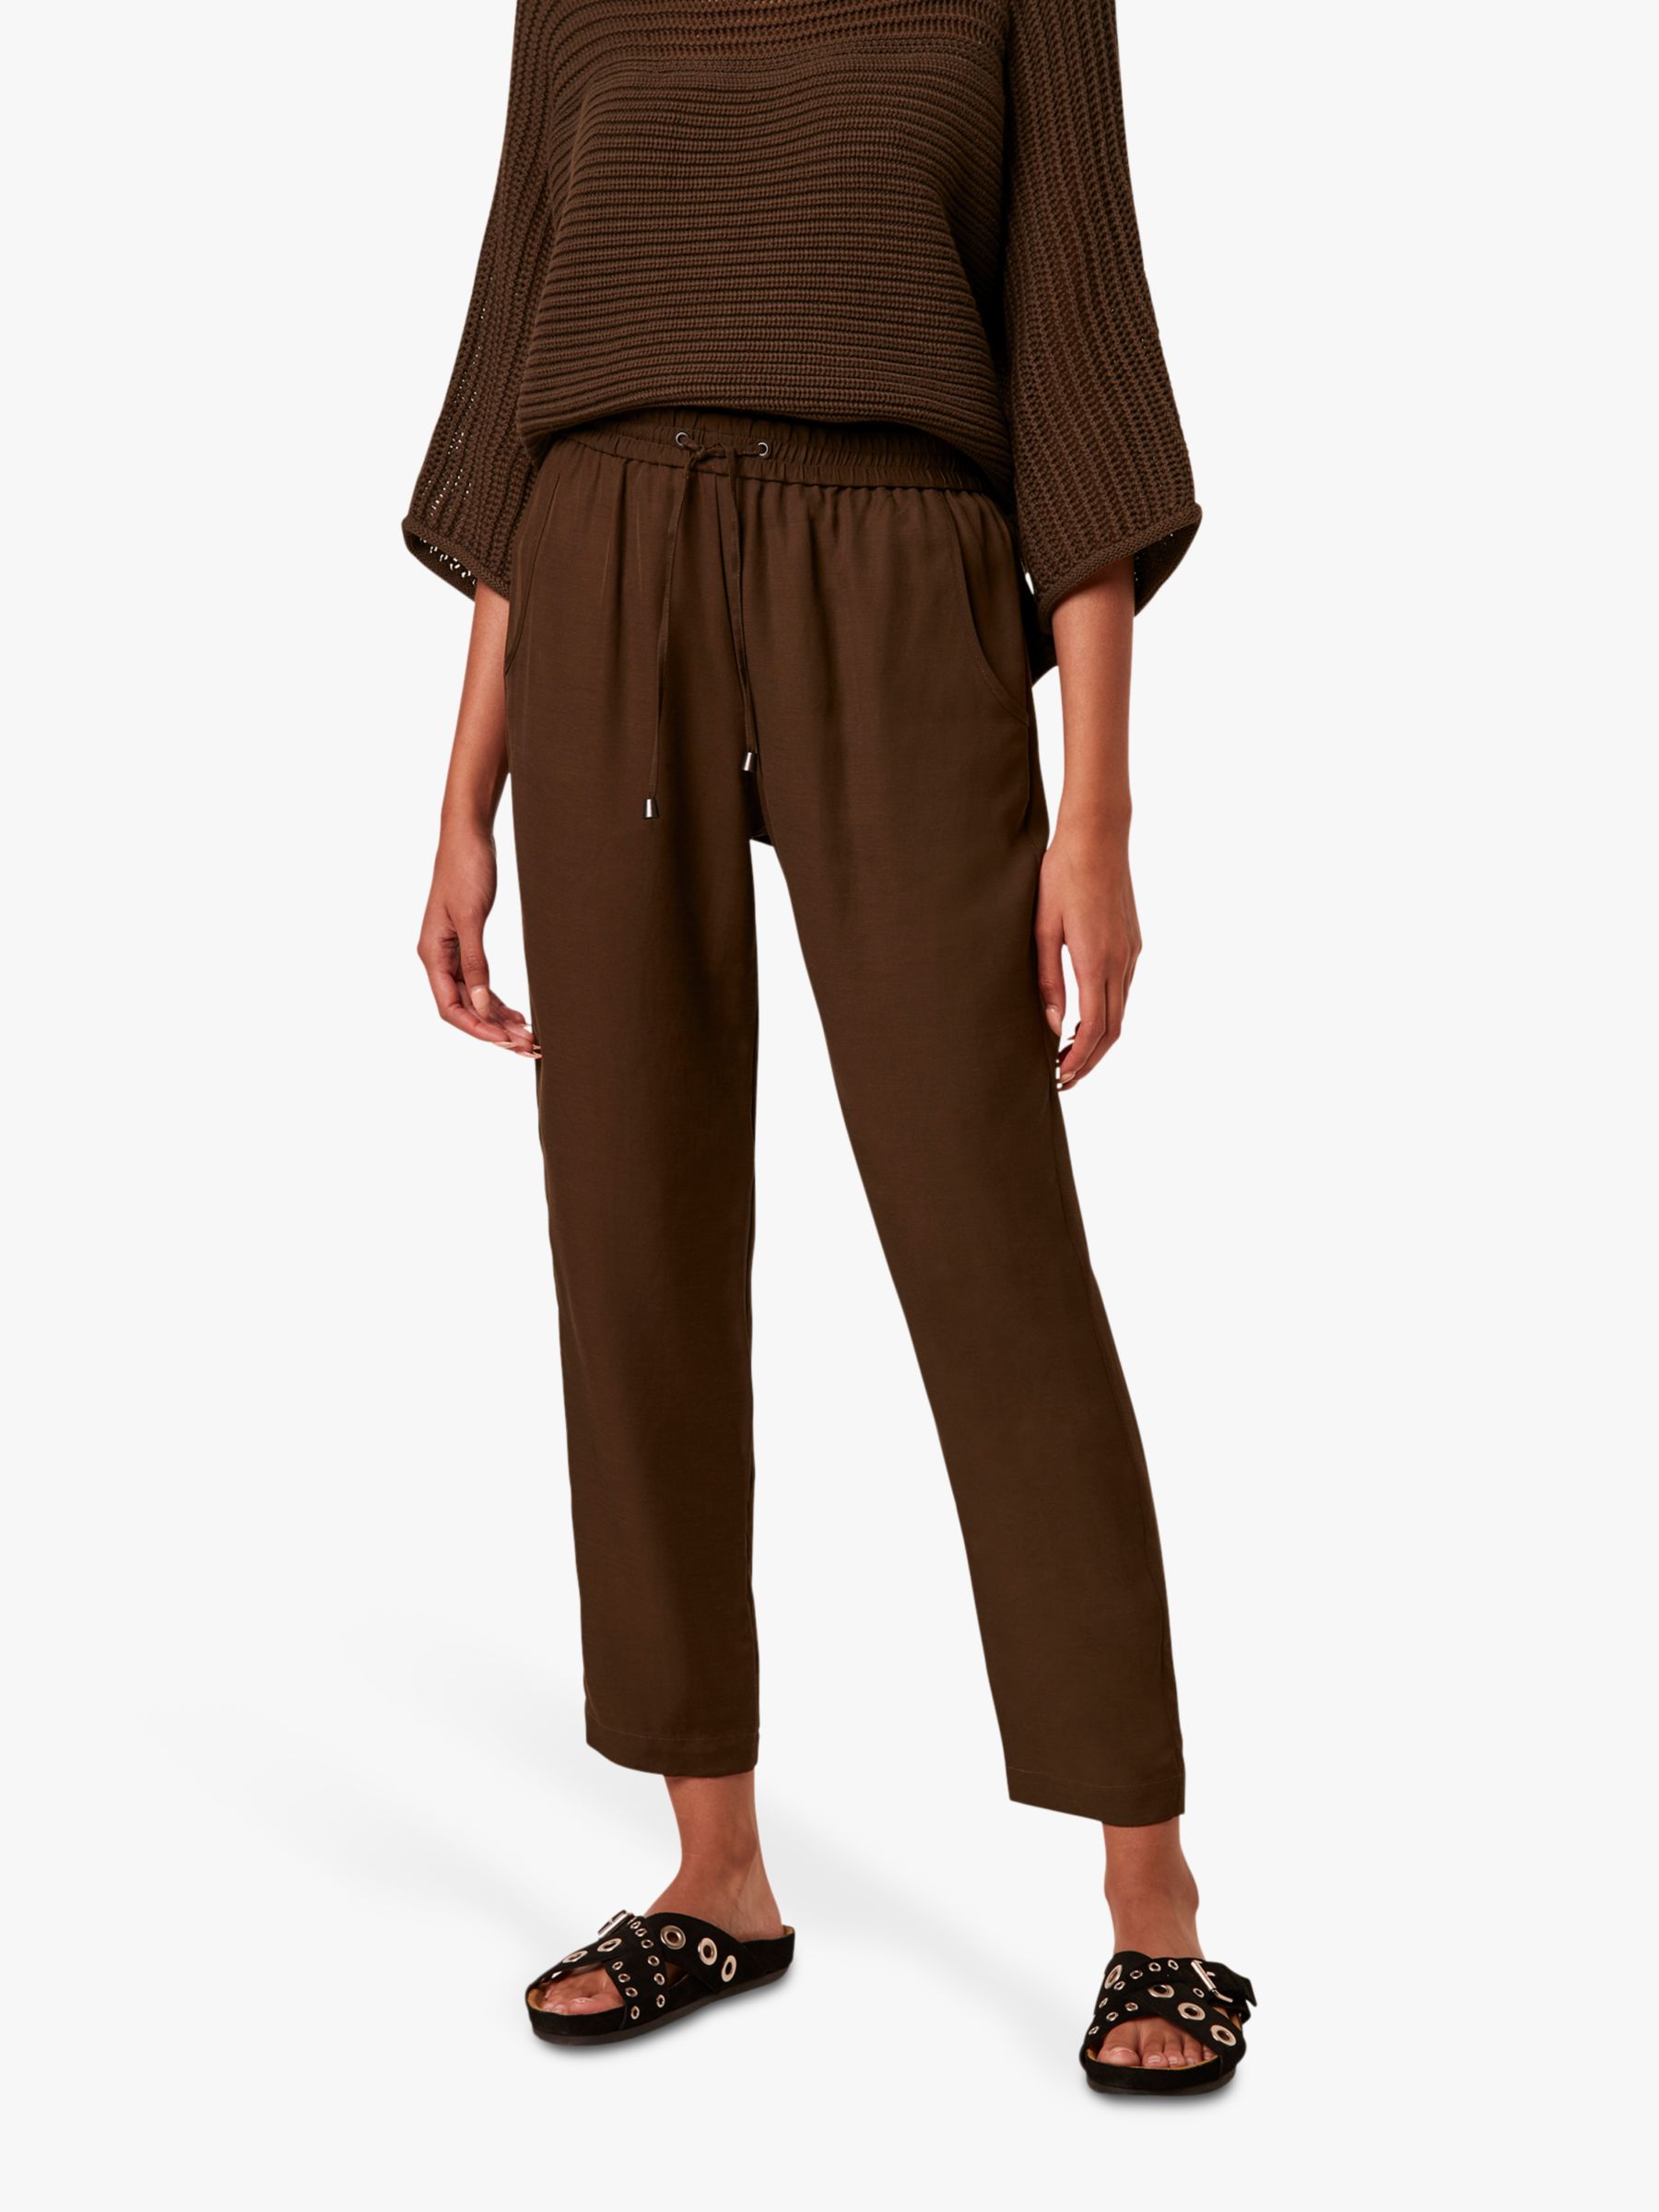 French Connection Enzo Drape Joggers, Summer Moss